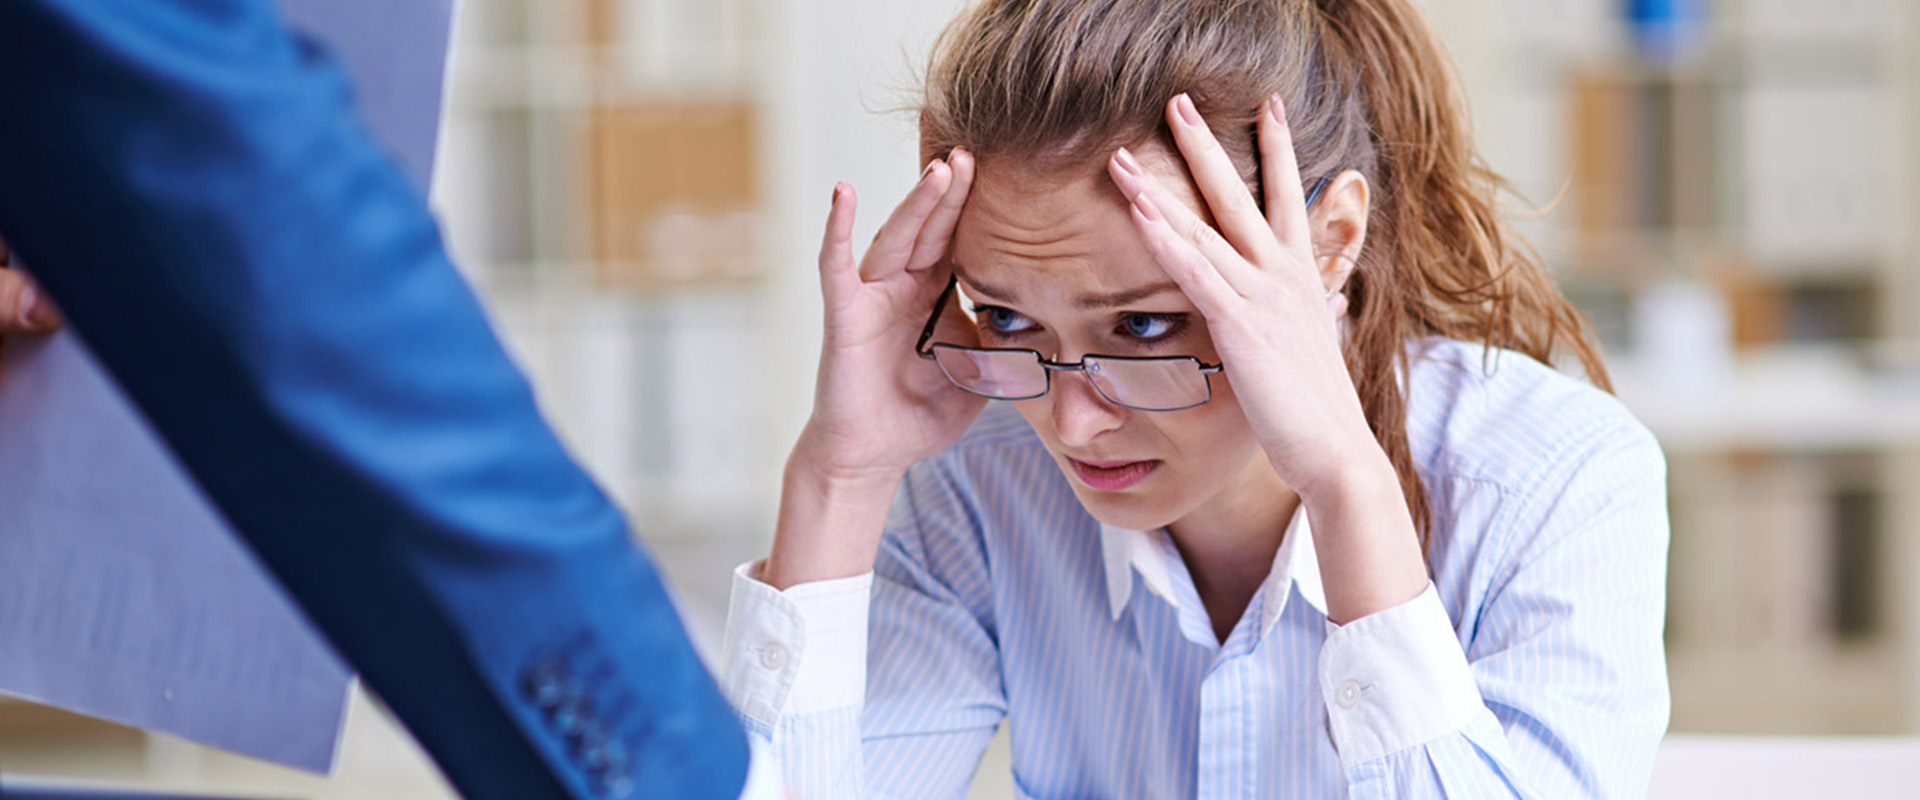 Workplace Burnout: Signs to Look out for & How to Overcome It